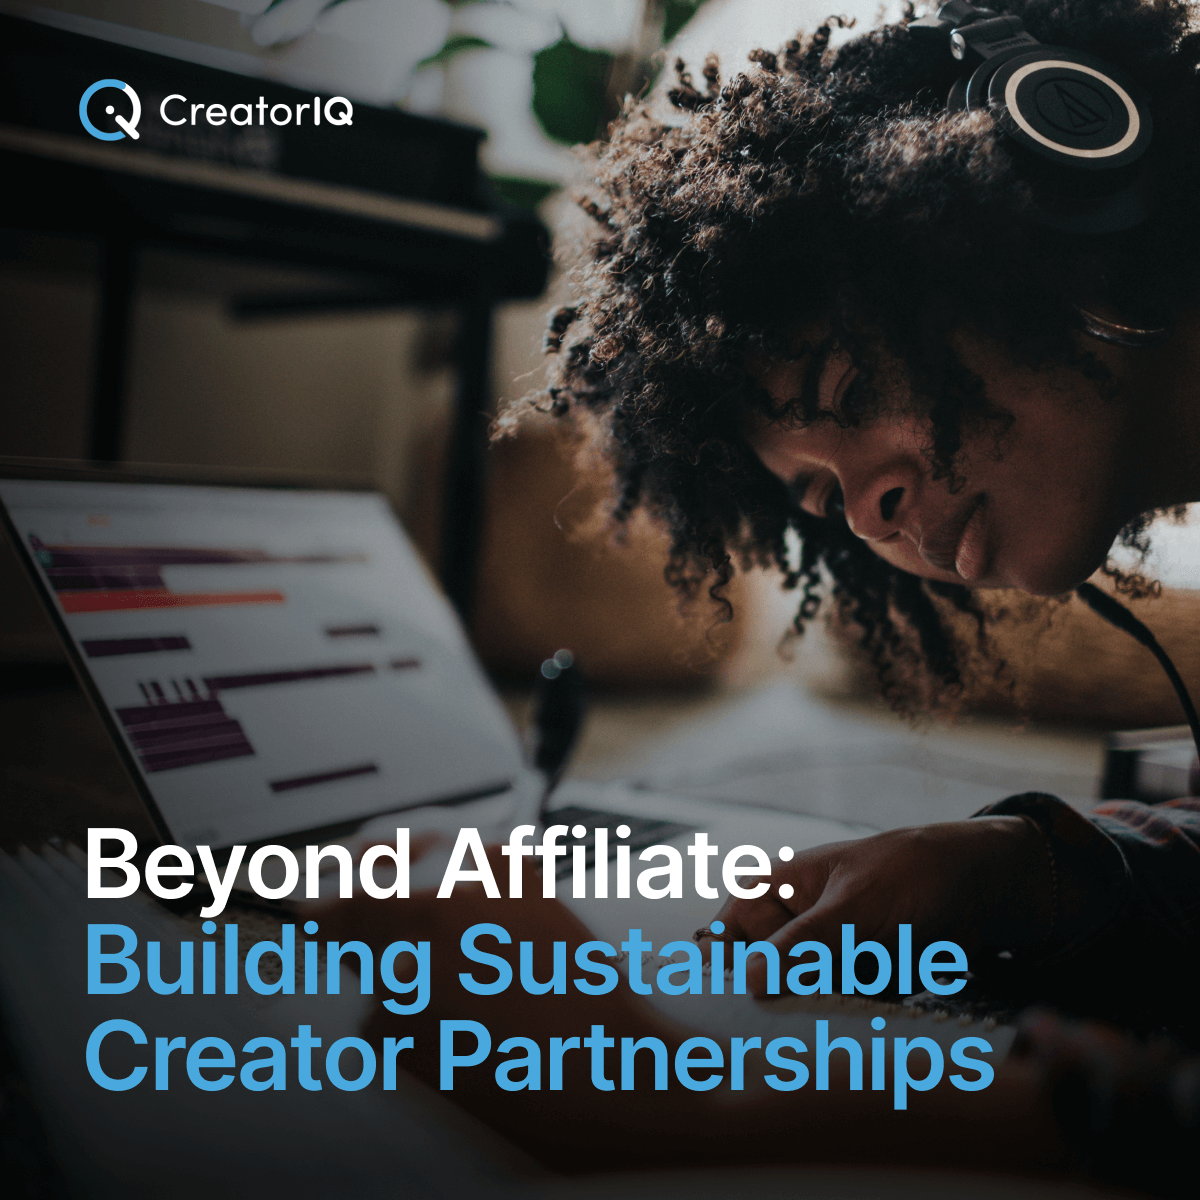 Beyond Affiliate: Building Sustainable Creator Partnerships